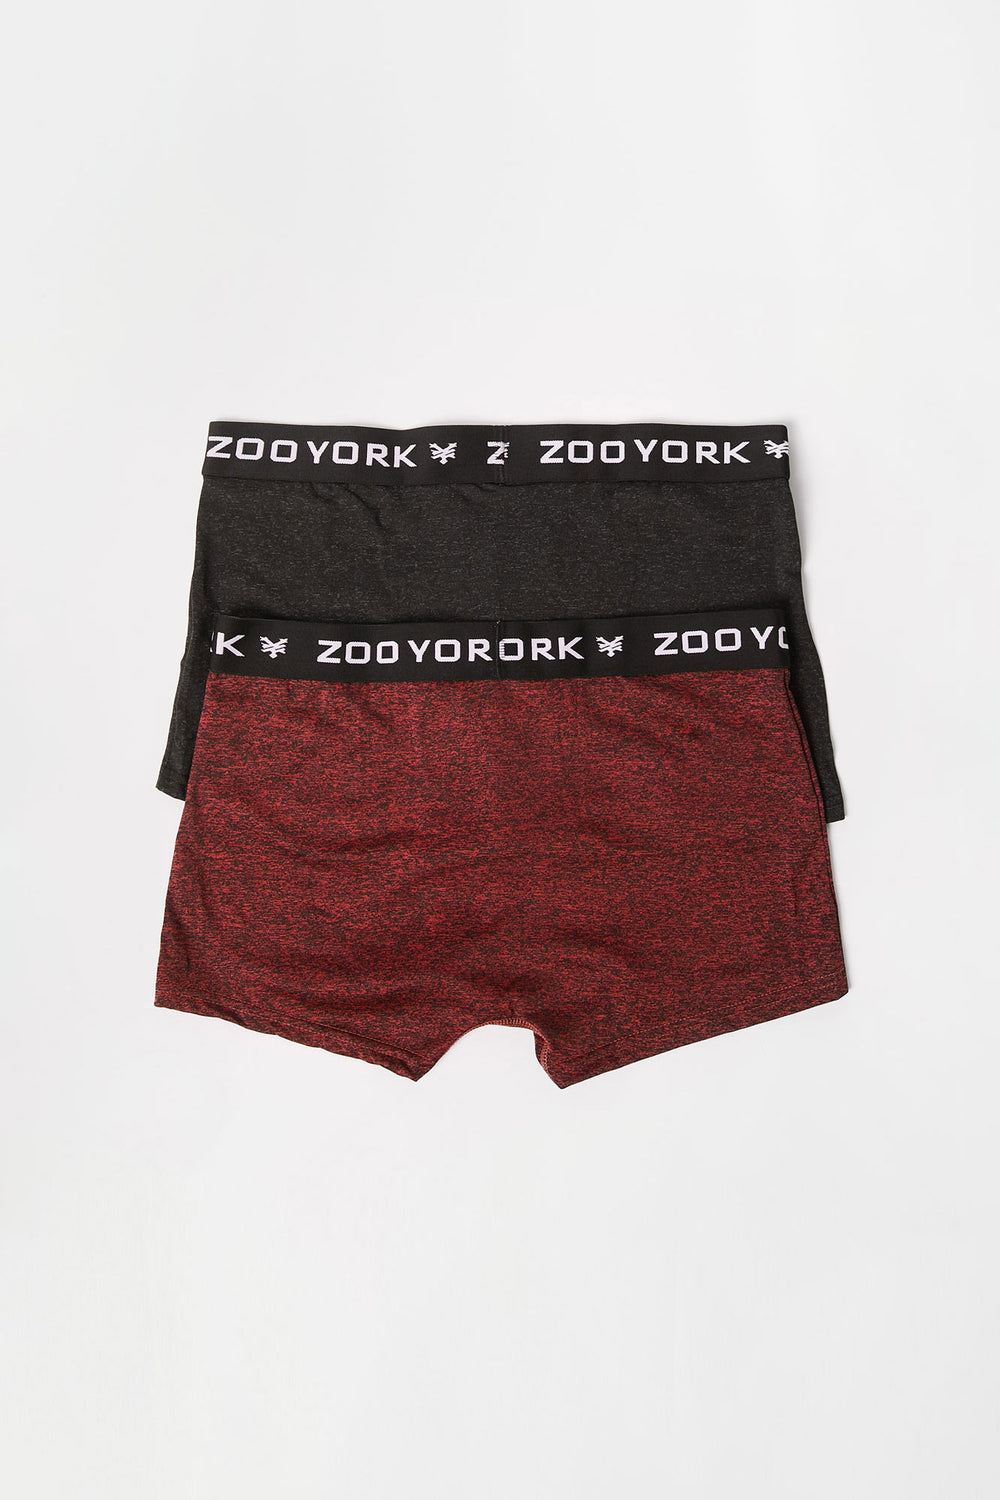 Zoo York Youth 2-Pack Space Dye Boxer Briefs Zoo York Youth 2-Pack Space Dye Boxer Briefs